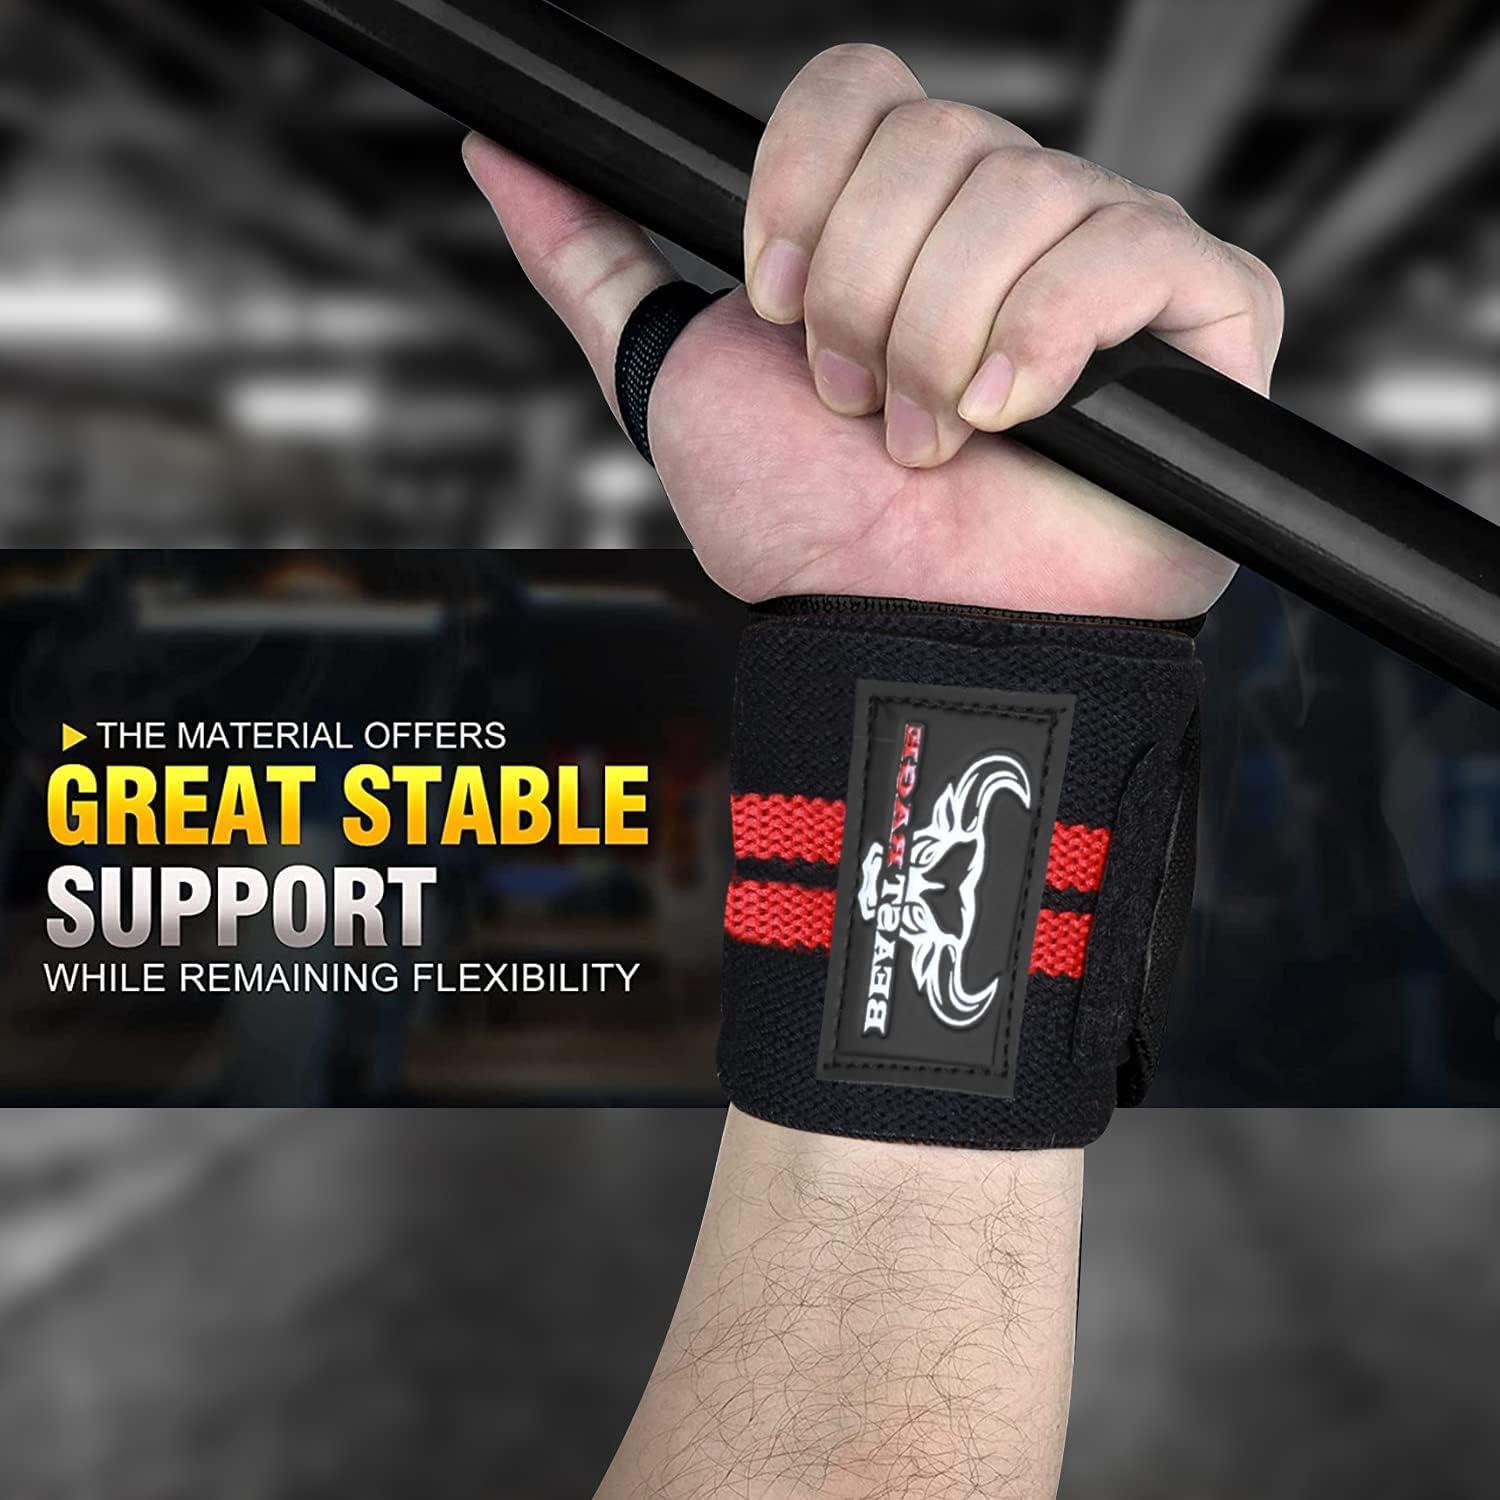 BEAST RAGE Weight Lifting Wrist Wraps Muscle Building Performance Fitness  Training Gym Straps Thumb Loop Support Stretchable Cotton Bandage Brace  Training Cuff RED / BLACK